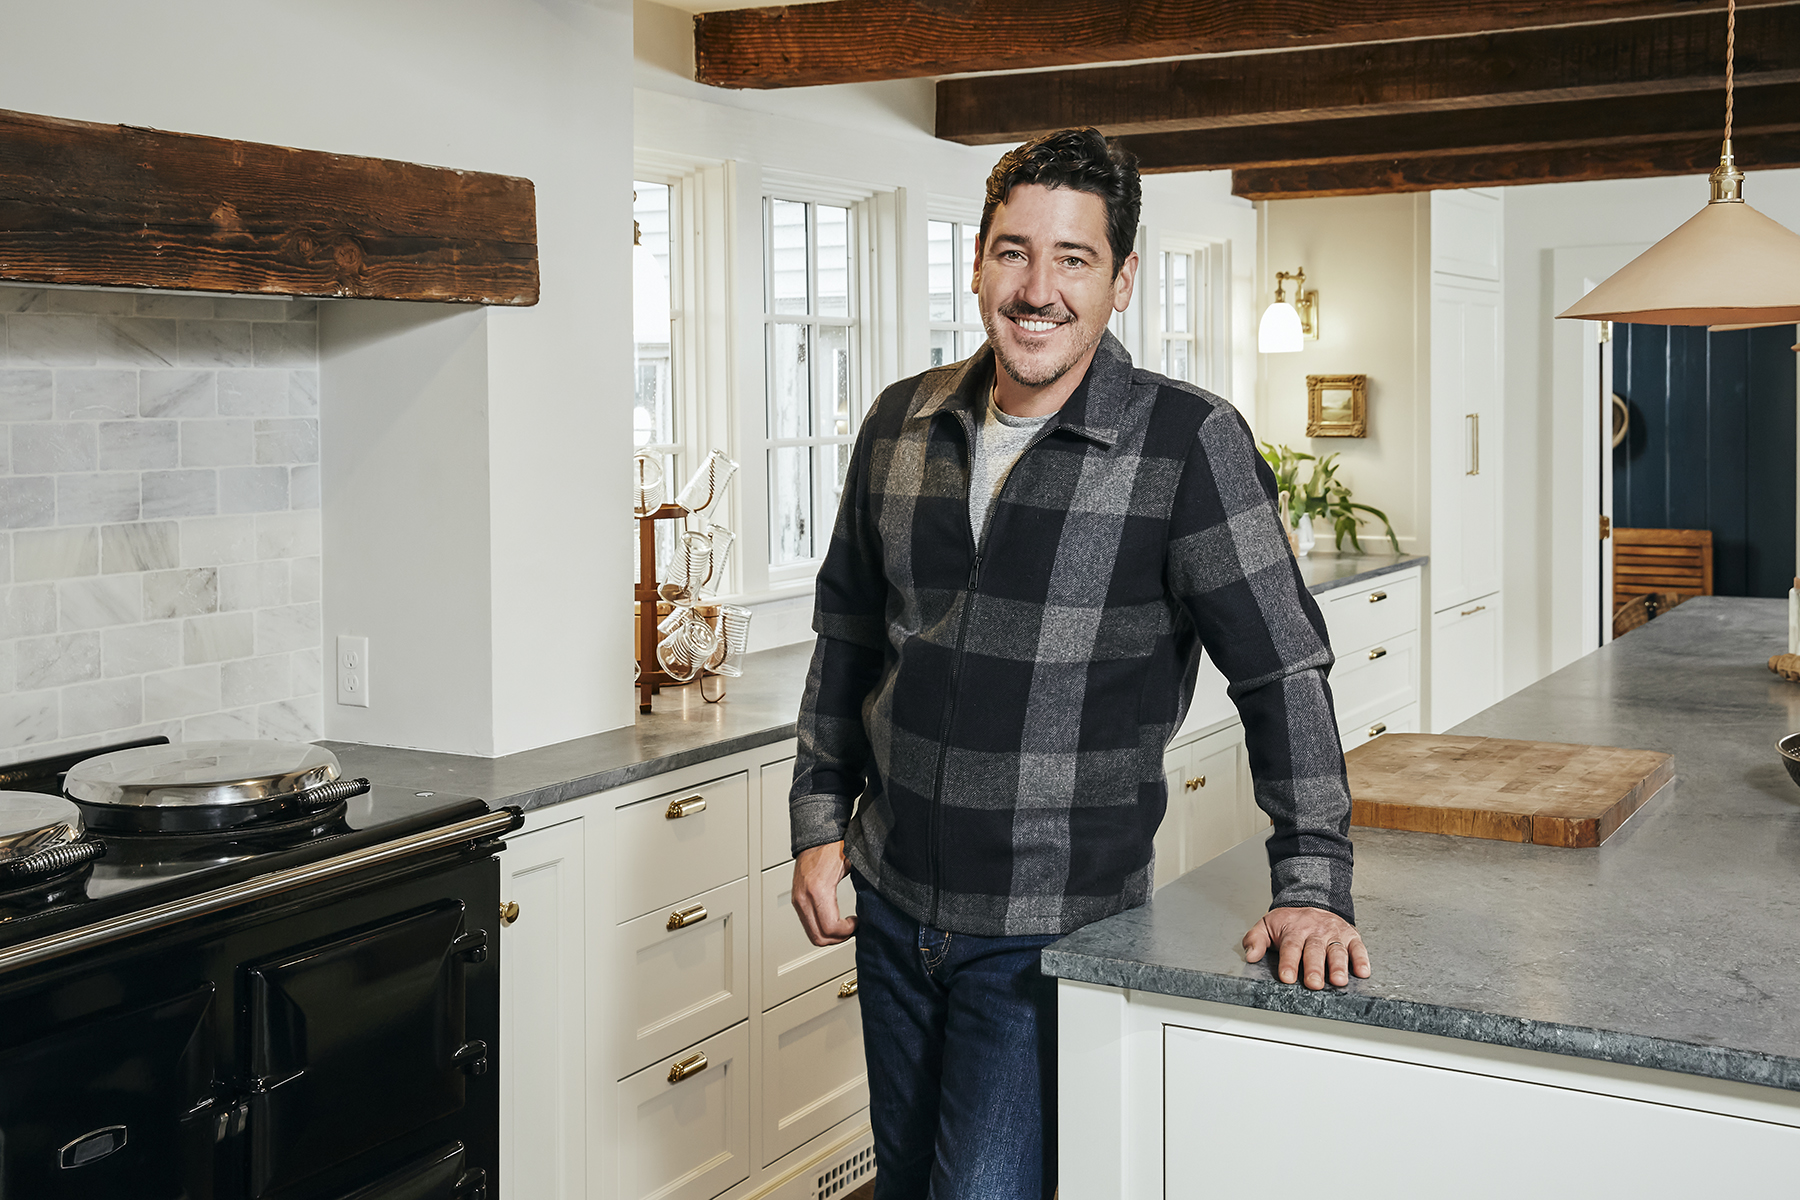 Get ready for ‘NKOTB’ star Jonathan Knight’s HGTV show, set in New